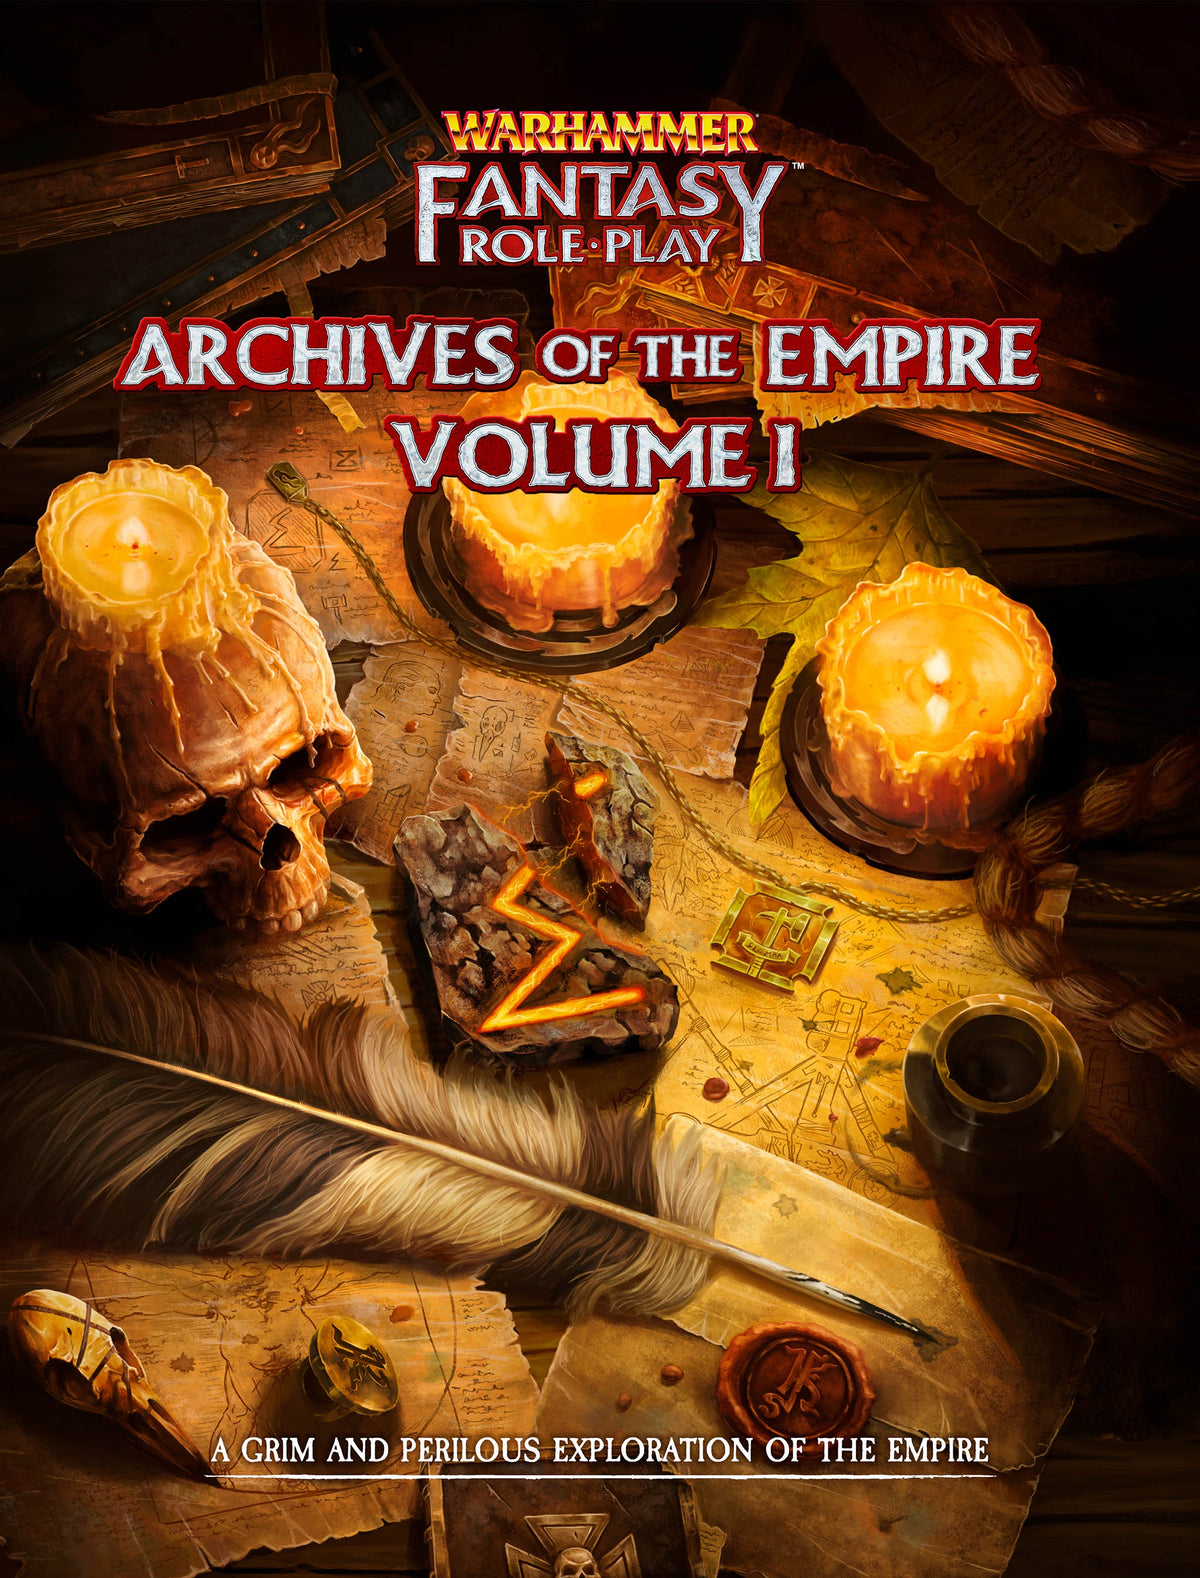 Warhammer Fantasy Roleplay Archives of the Empire Volume 1